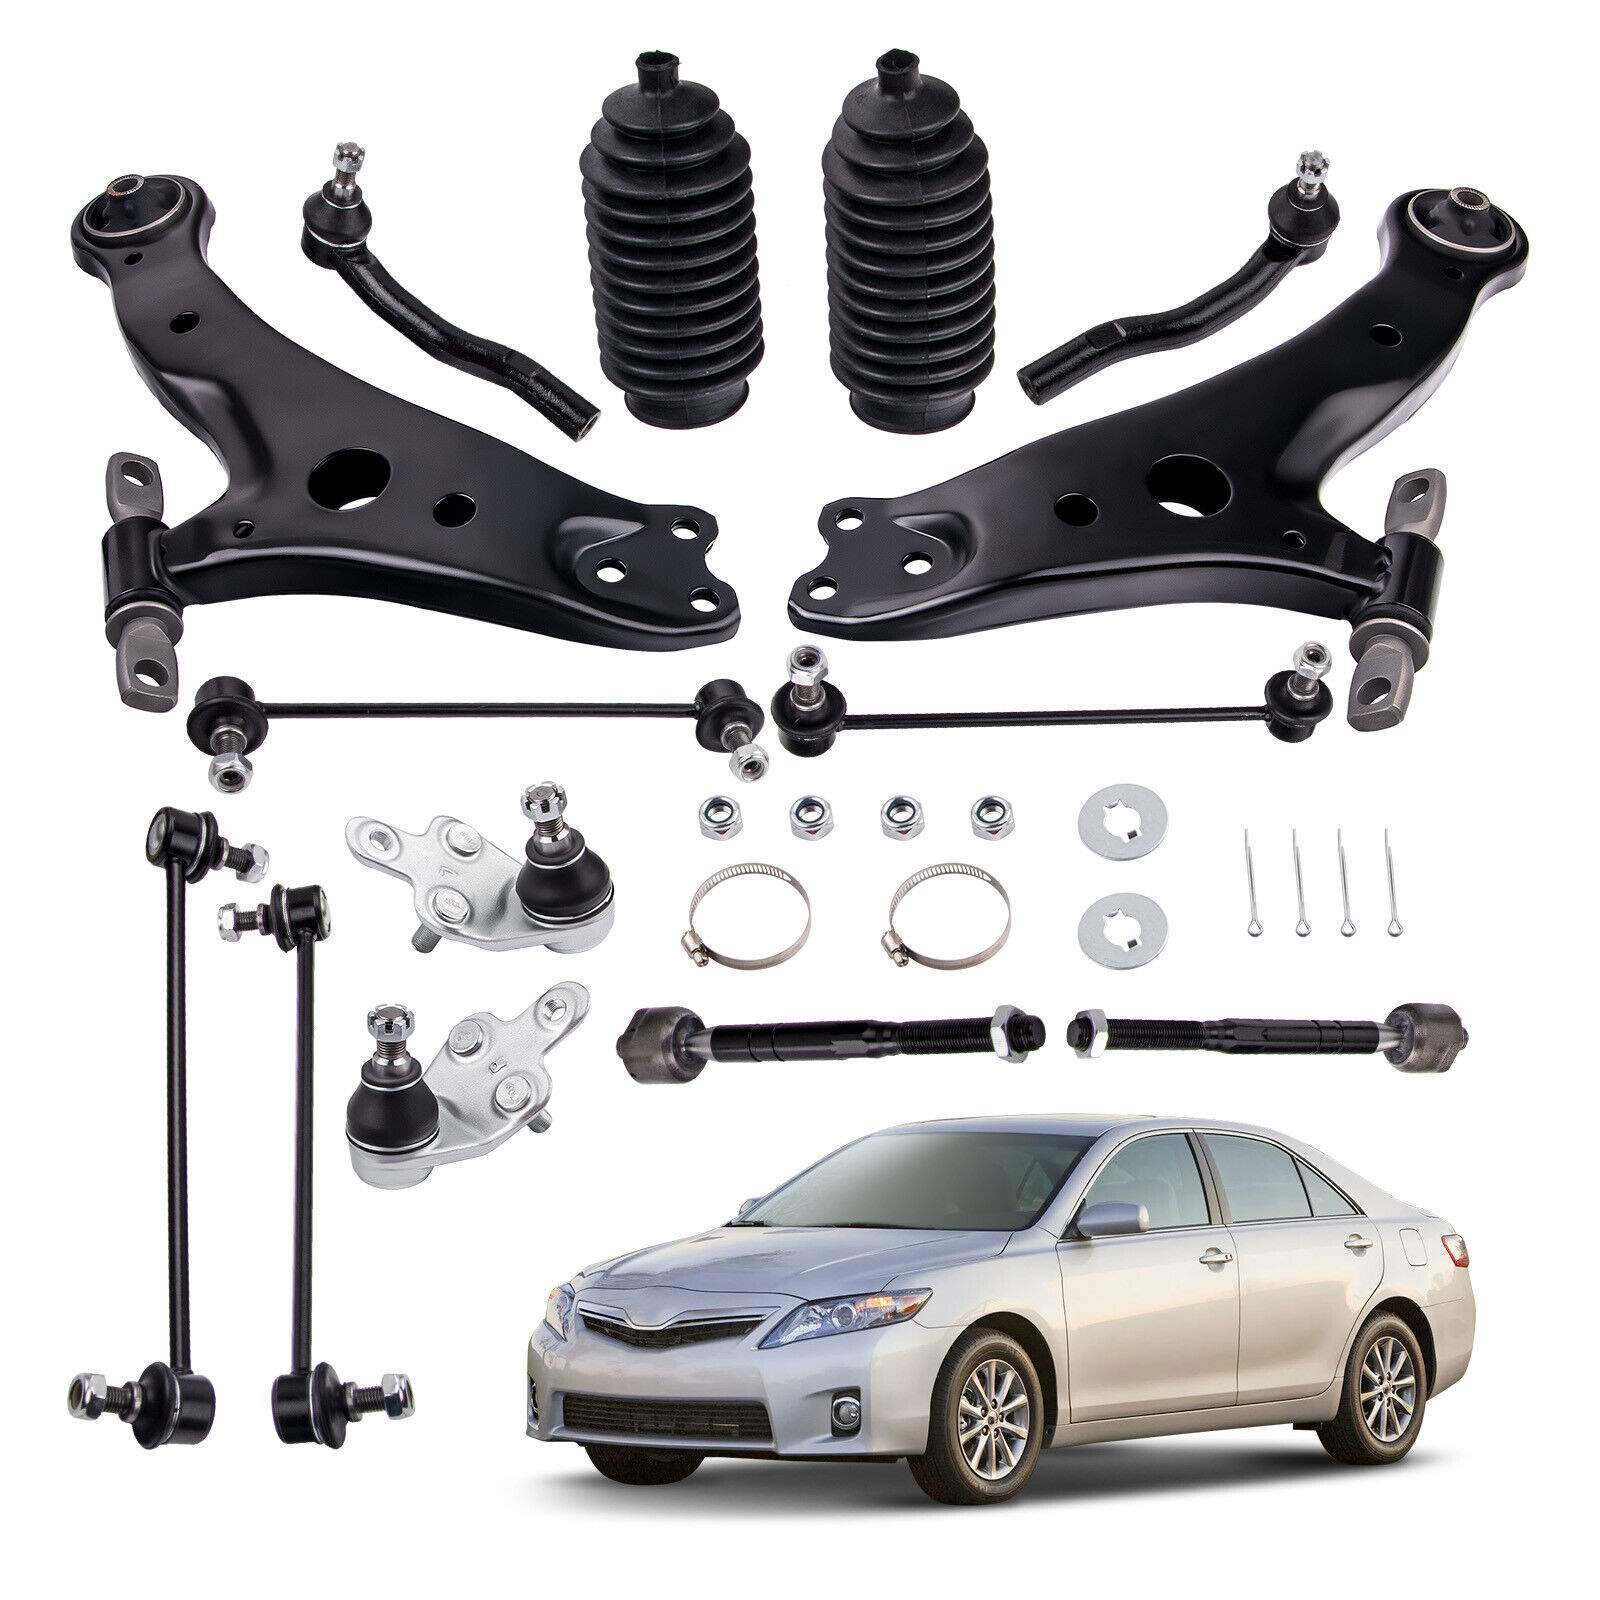 14Pcs Suspension Front Lower Control Arm Tie Rods for Toyota Camry 2007 - 2011 - $117.80